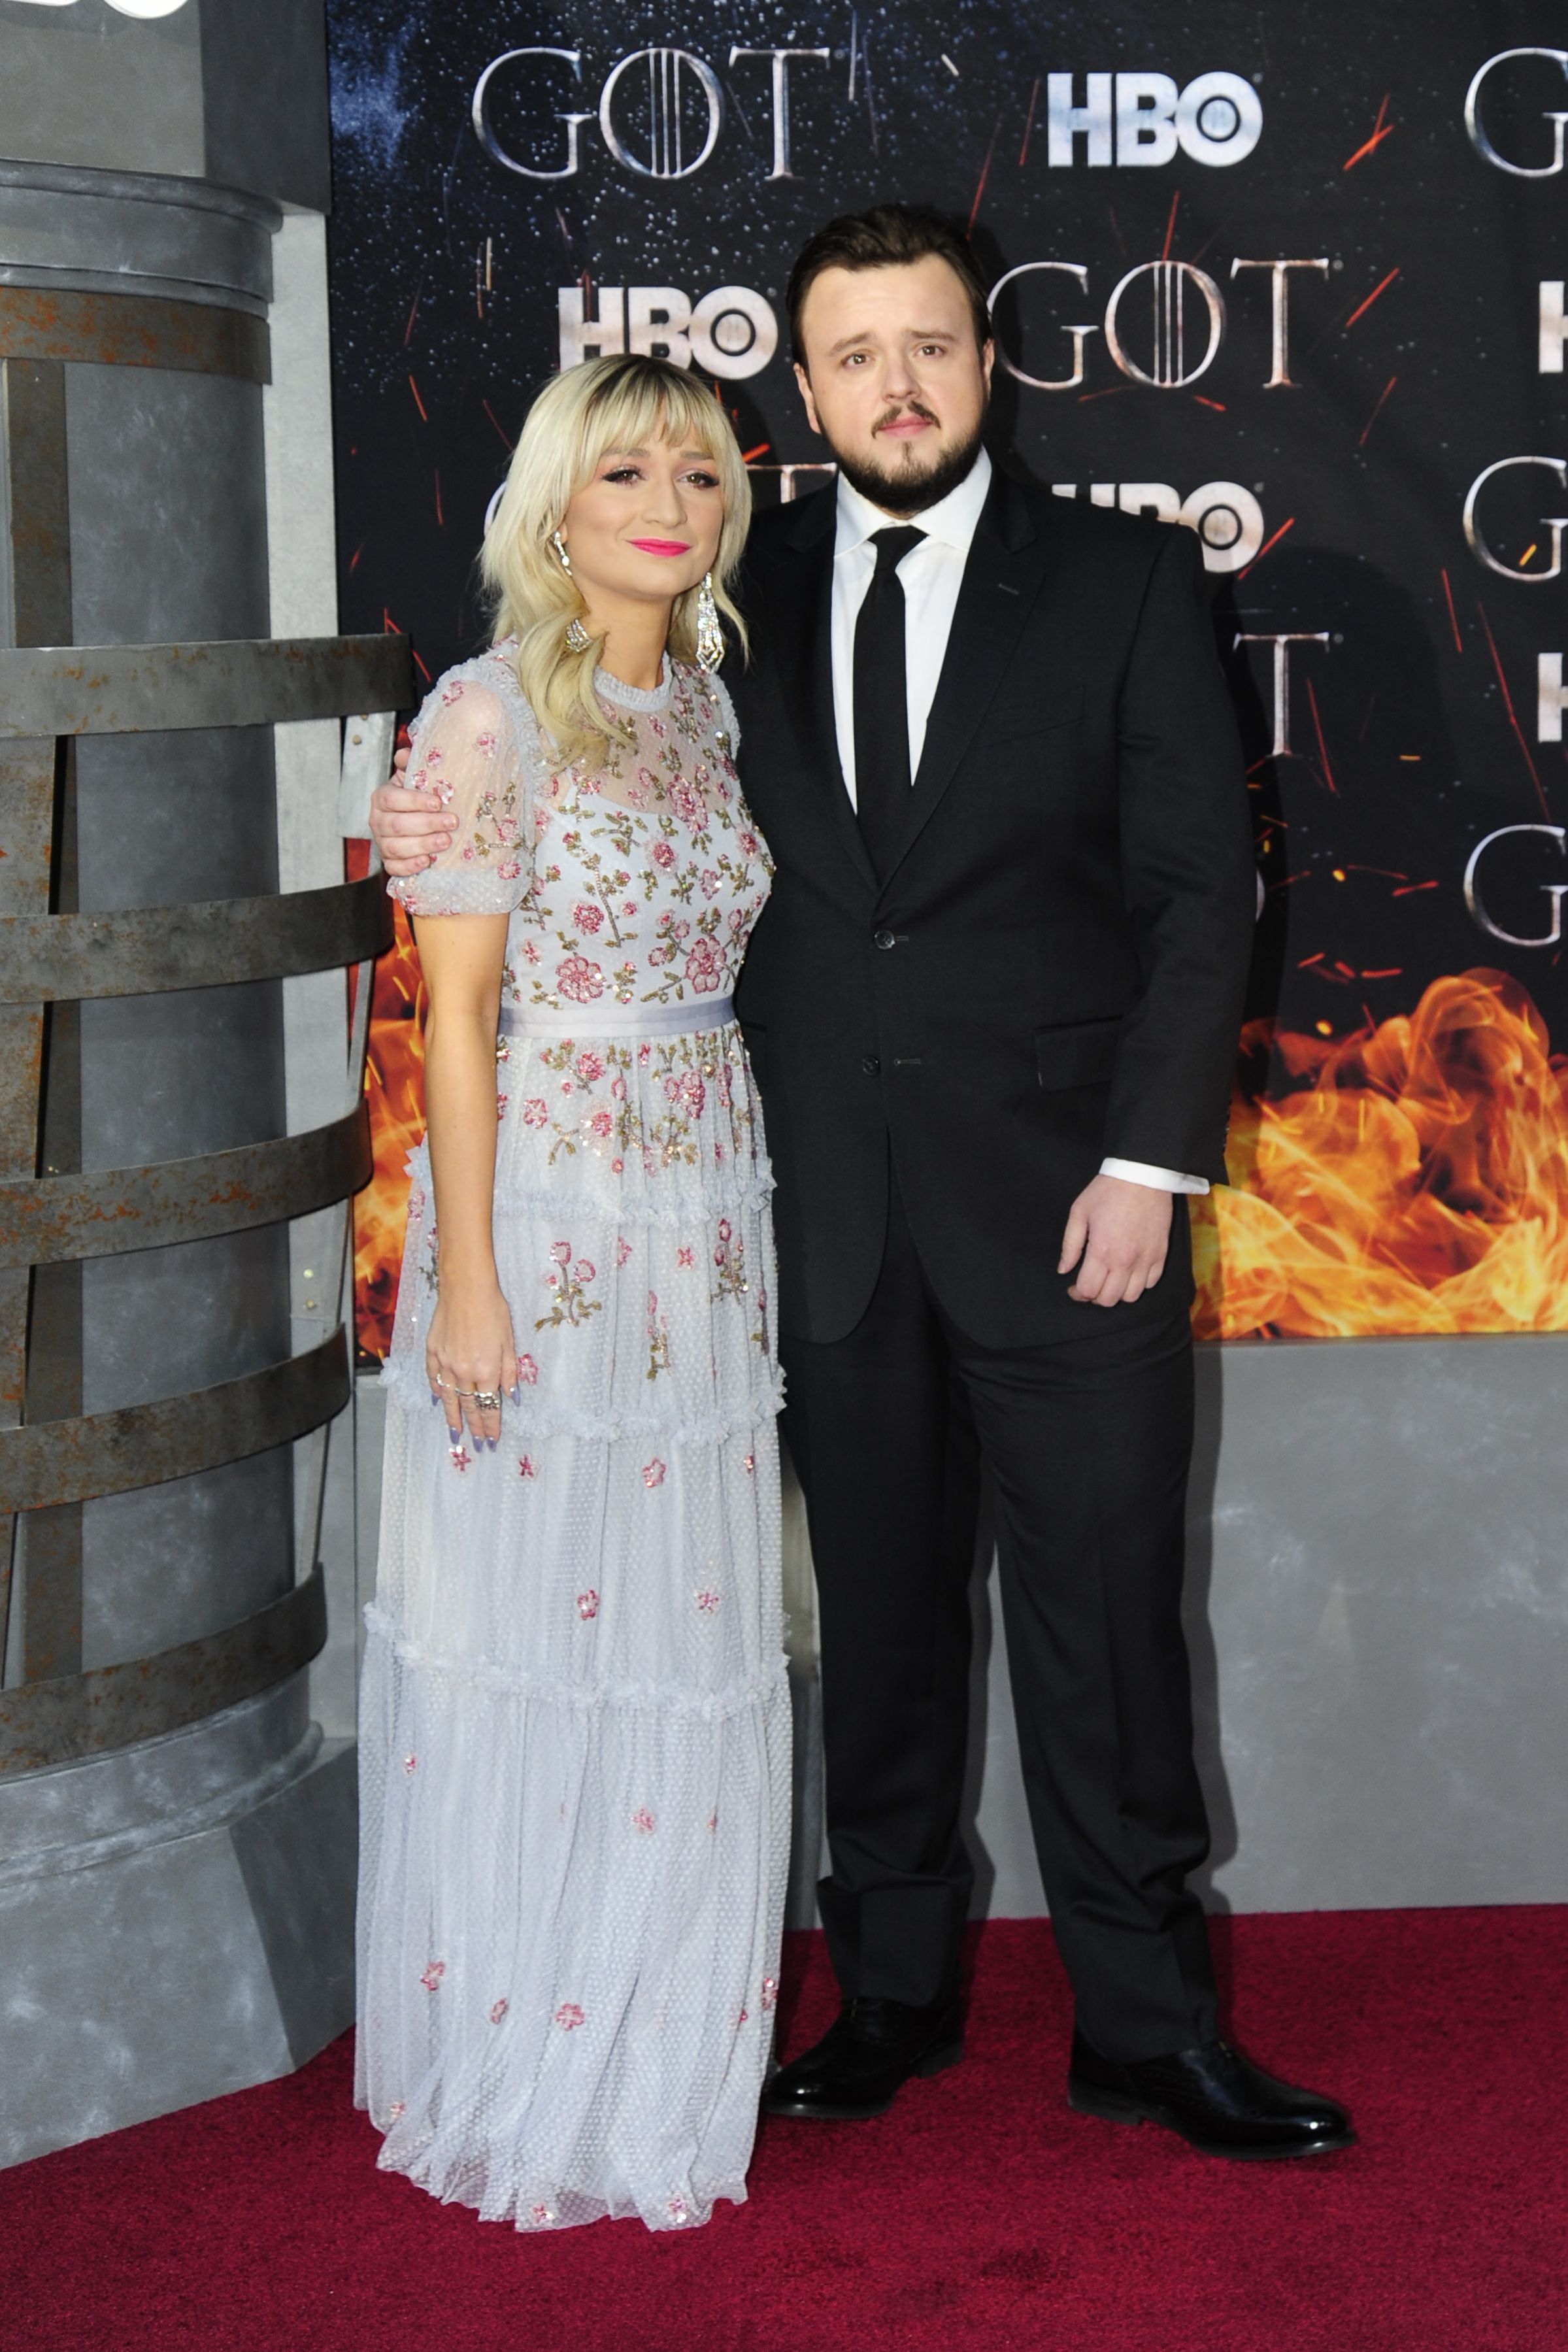 What the Game of Thrones Cast Season 8 Premiere Red Carpet